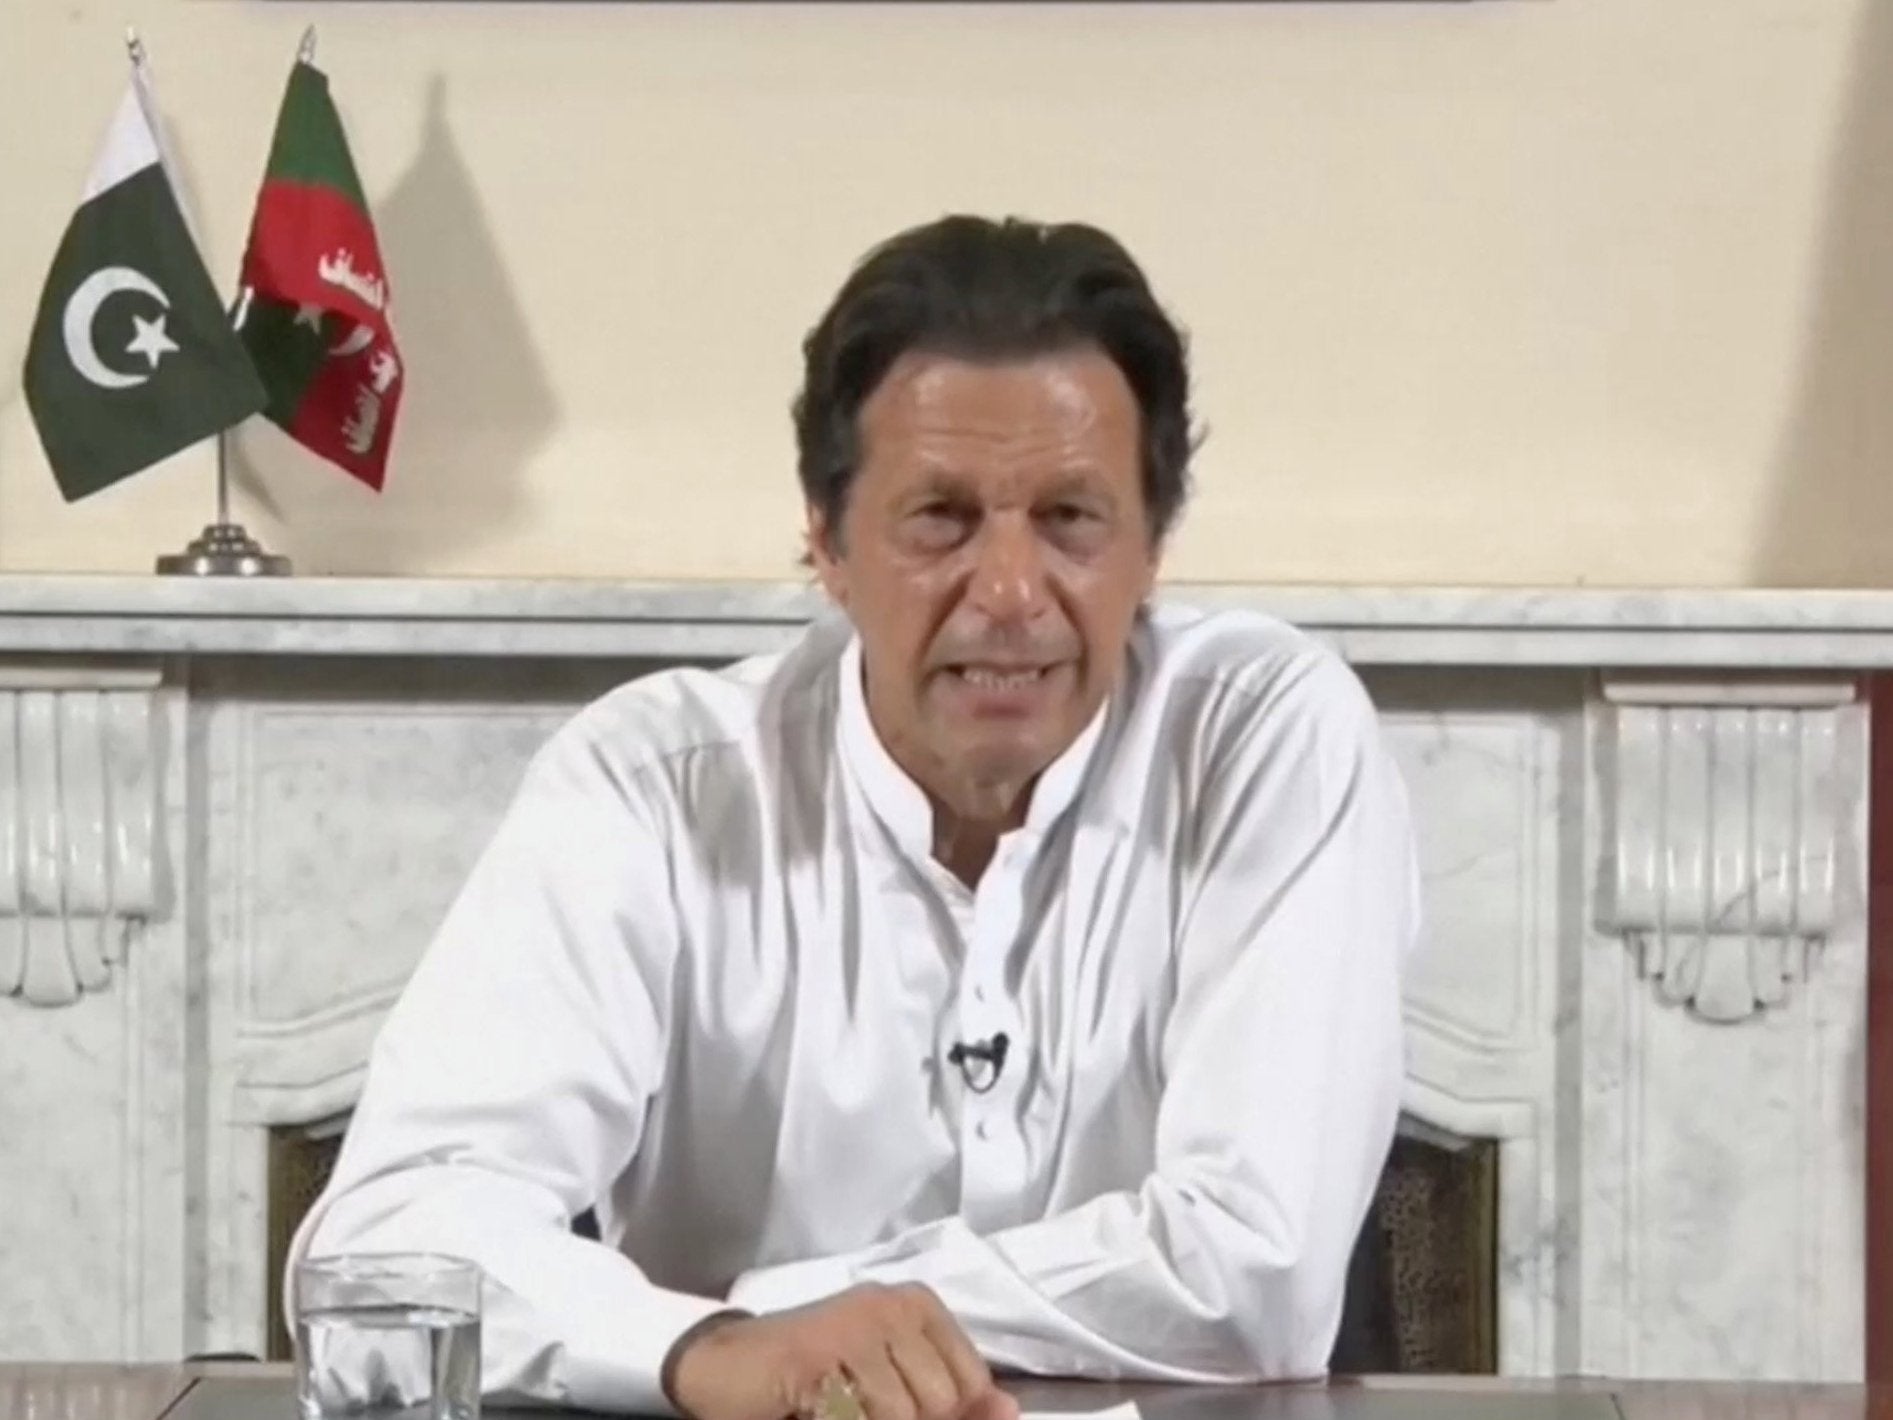 Imran Khan gives a speech as he declares victory in the general election in Islamabad, Pakistan